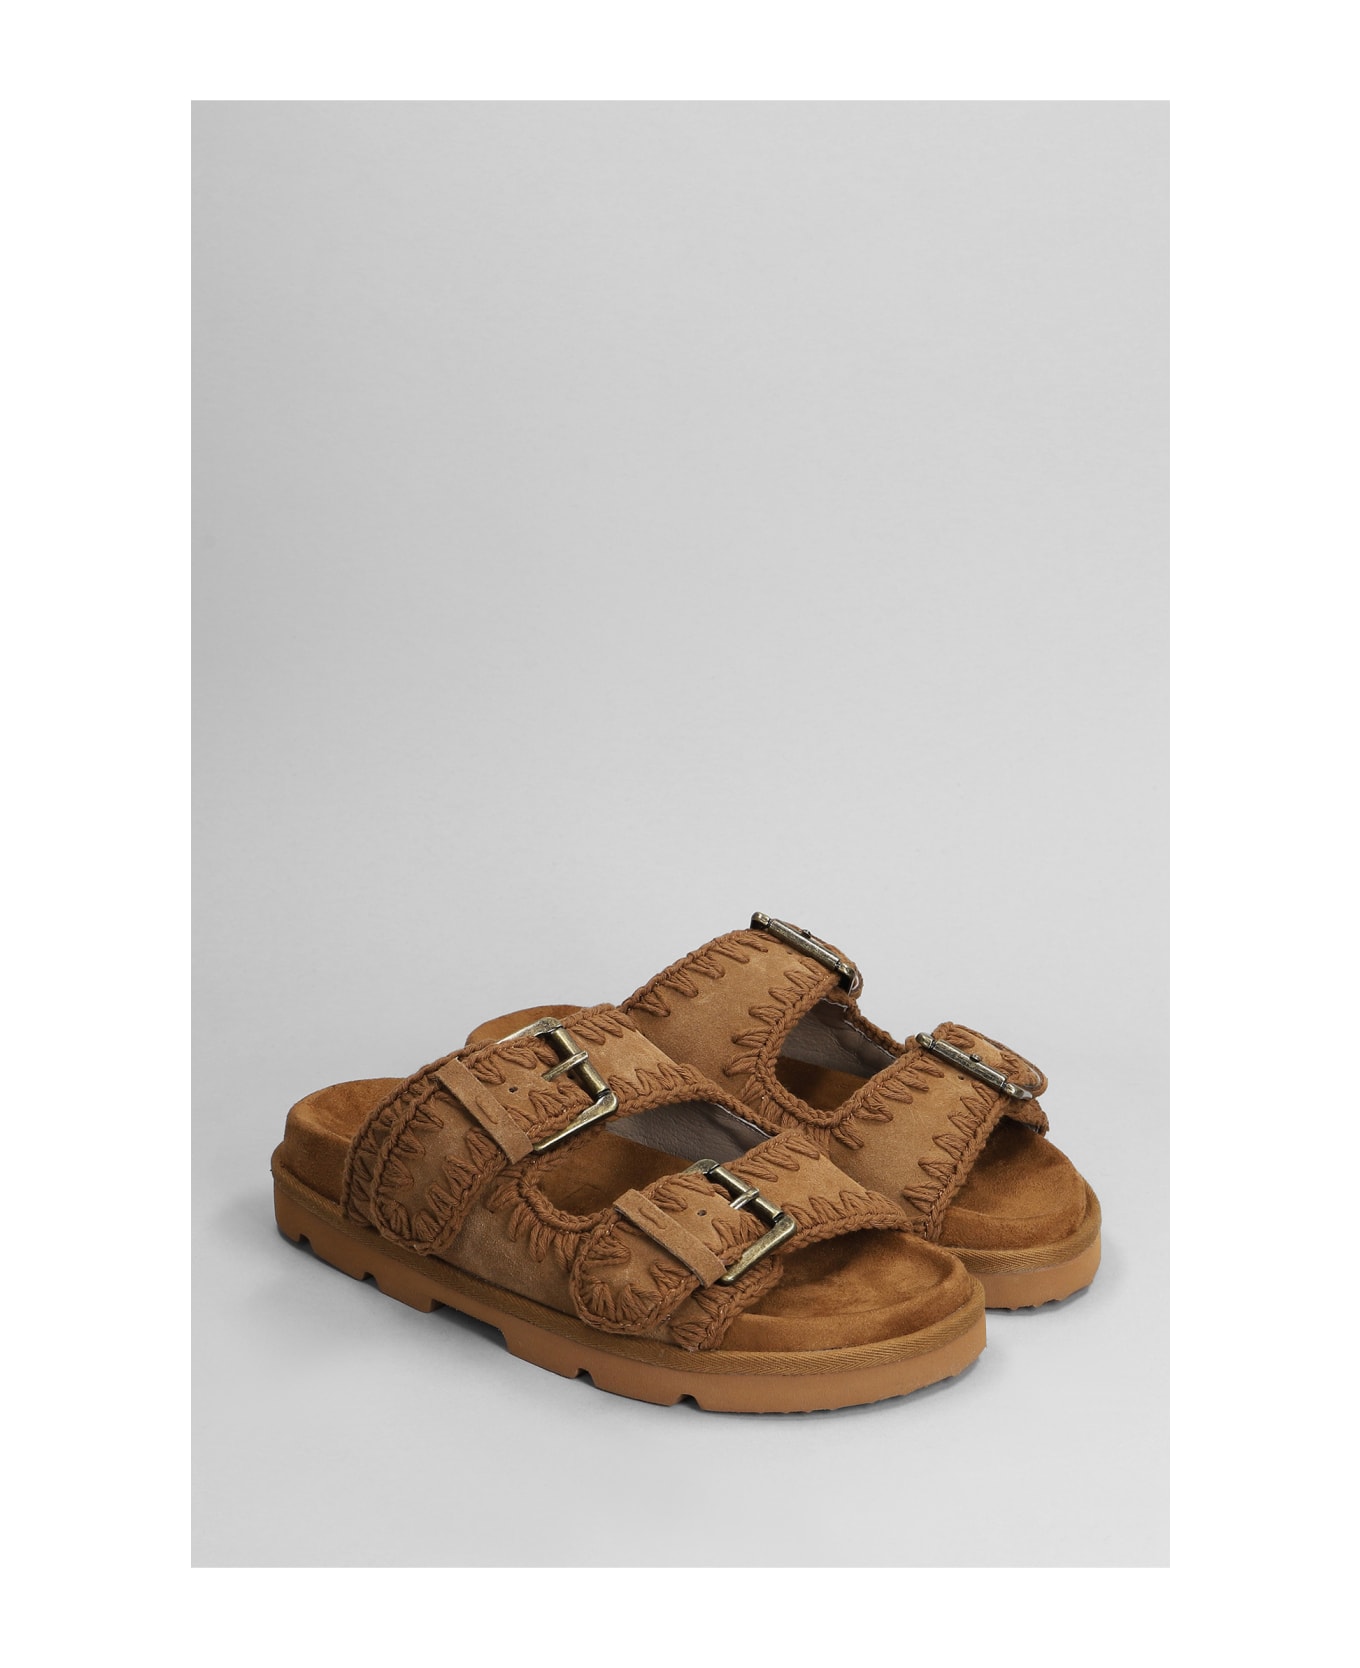 Mou Low Bio Sandal Slipper-mule In Leather Color Suede - Brown サンダル